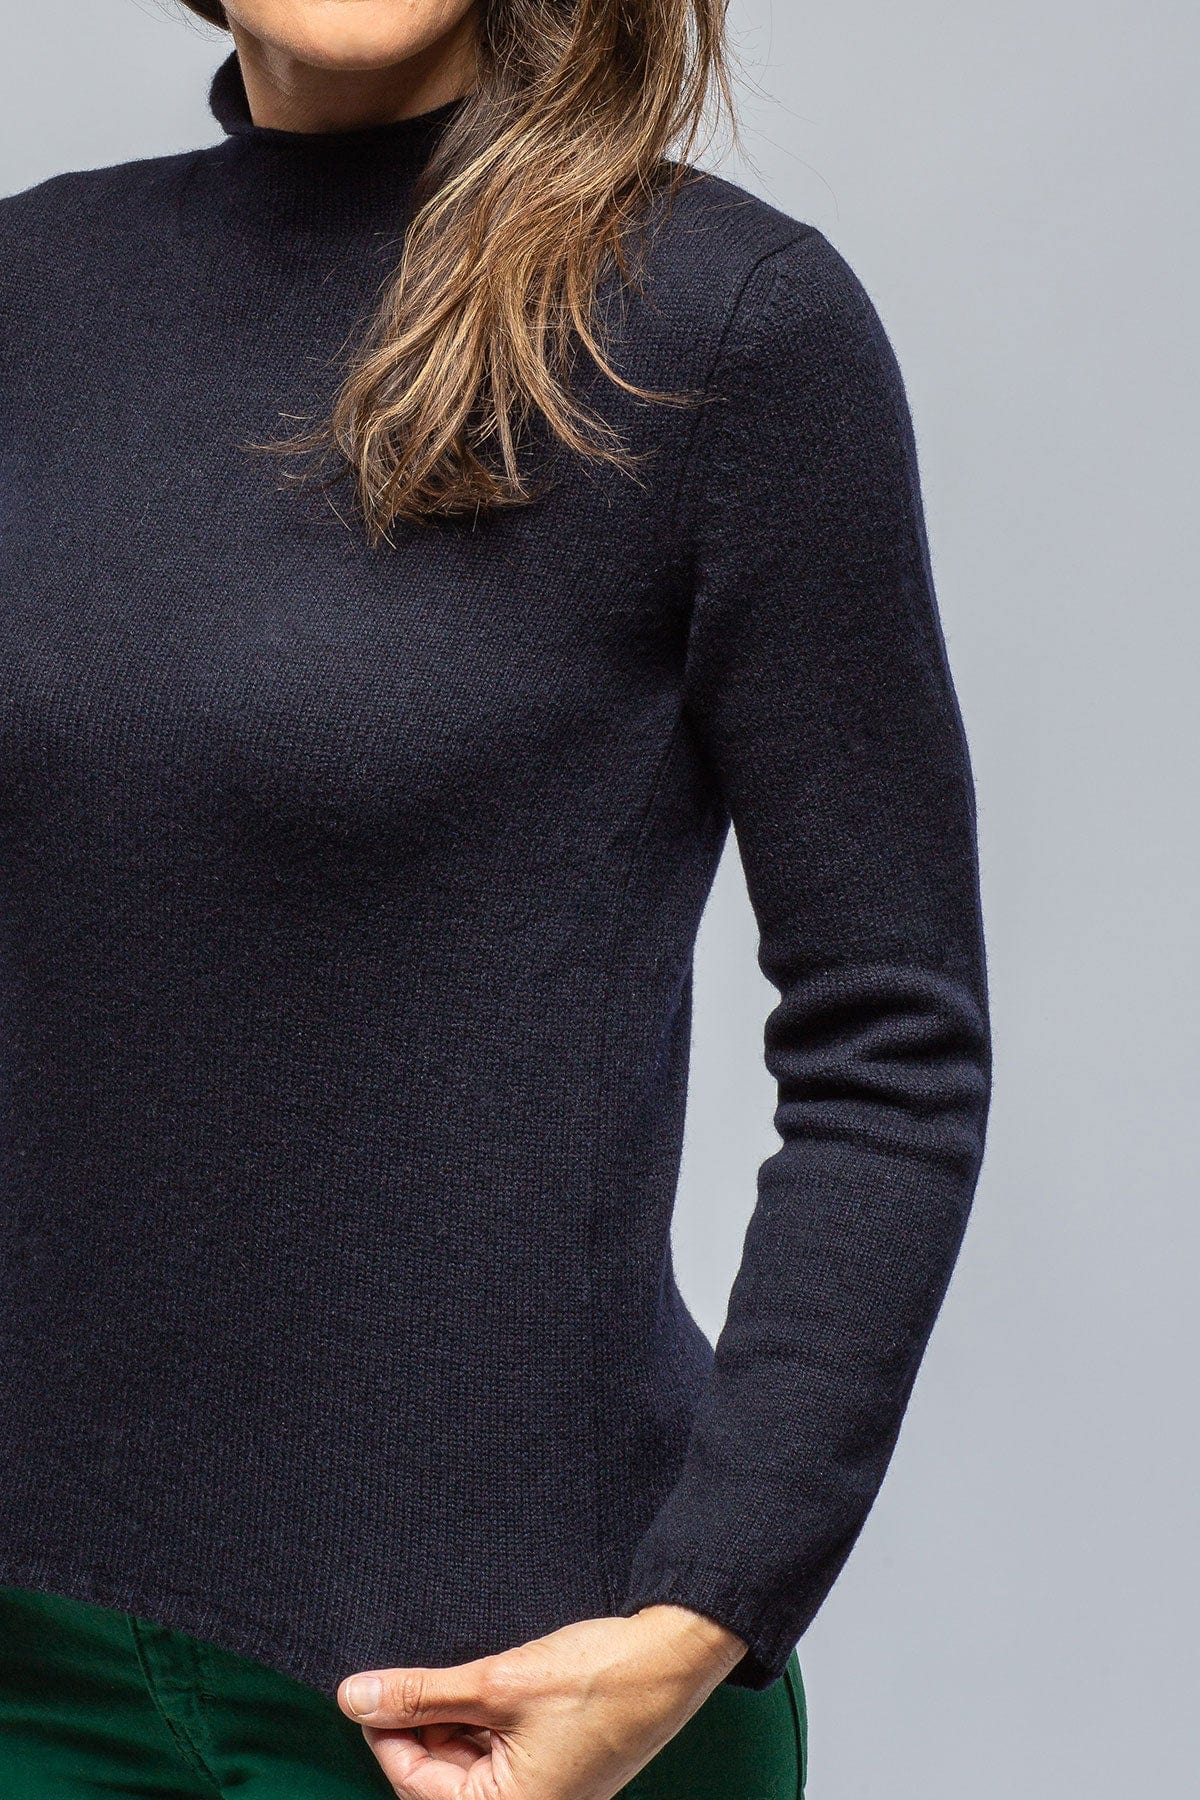 Tromba Mock Neck Cashmere Sweater In Navy - AXEL'S